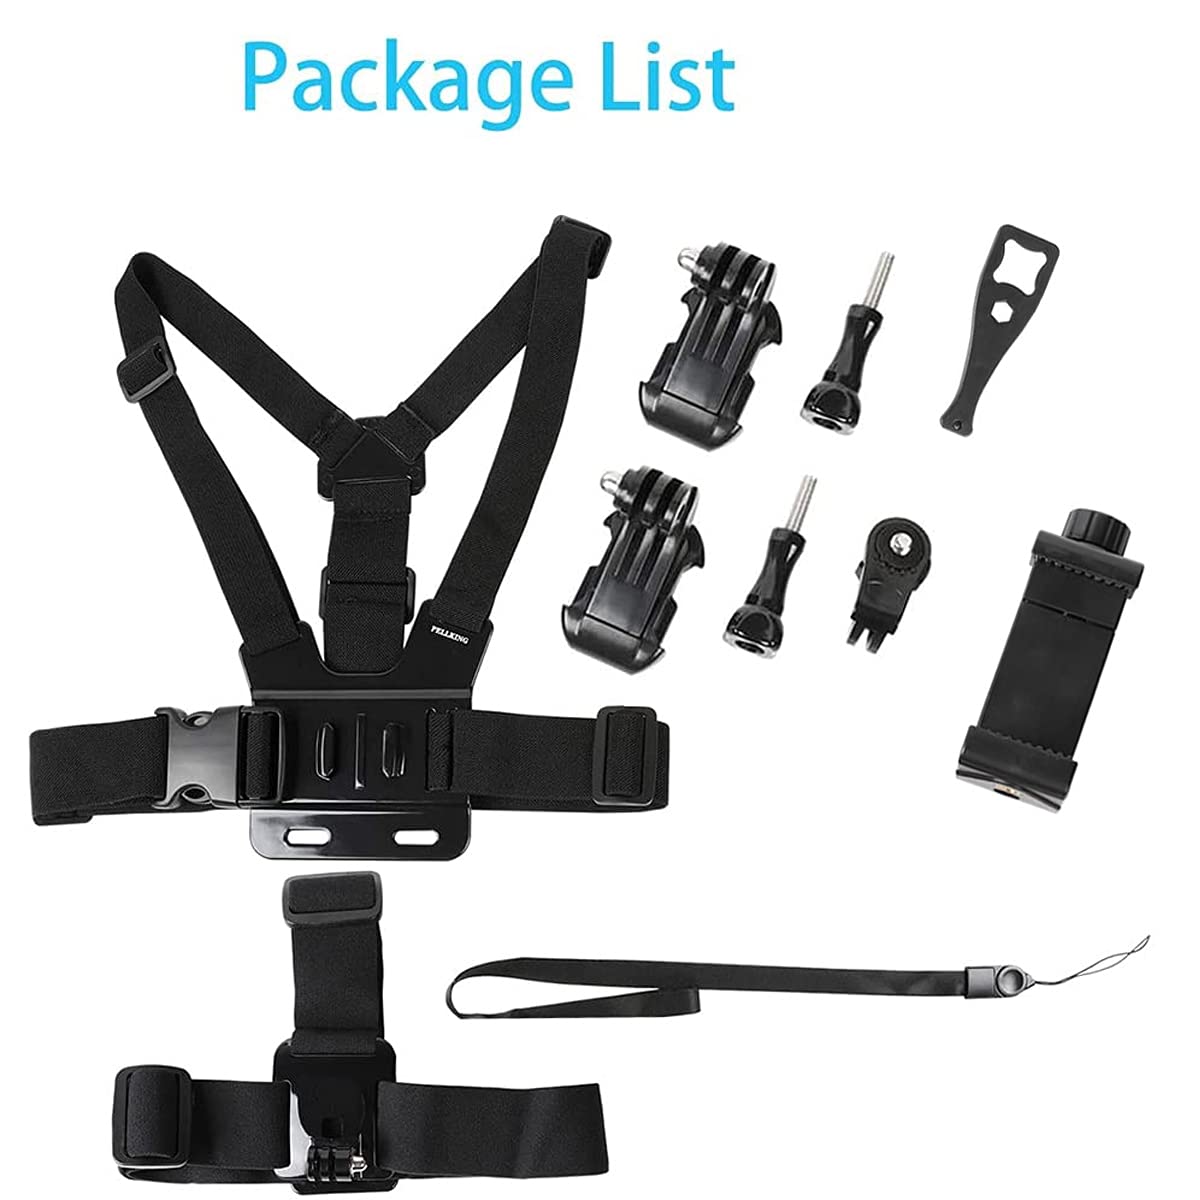 Mobile Phone Chest Strap Harness Mount Head Strap Holder Kit for POV/VLOG,Cell Phone Clip Compatible with iPhone,Samsung,GoPro Hero 9, 8,7, 6, 5, 4, 3,2, 1,AKASO,DJI Osmo,and Action Cameras…